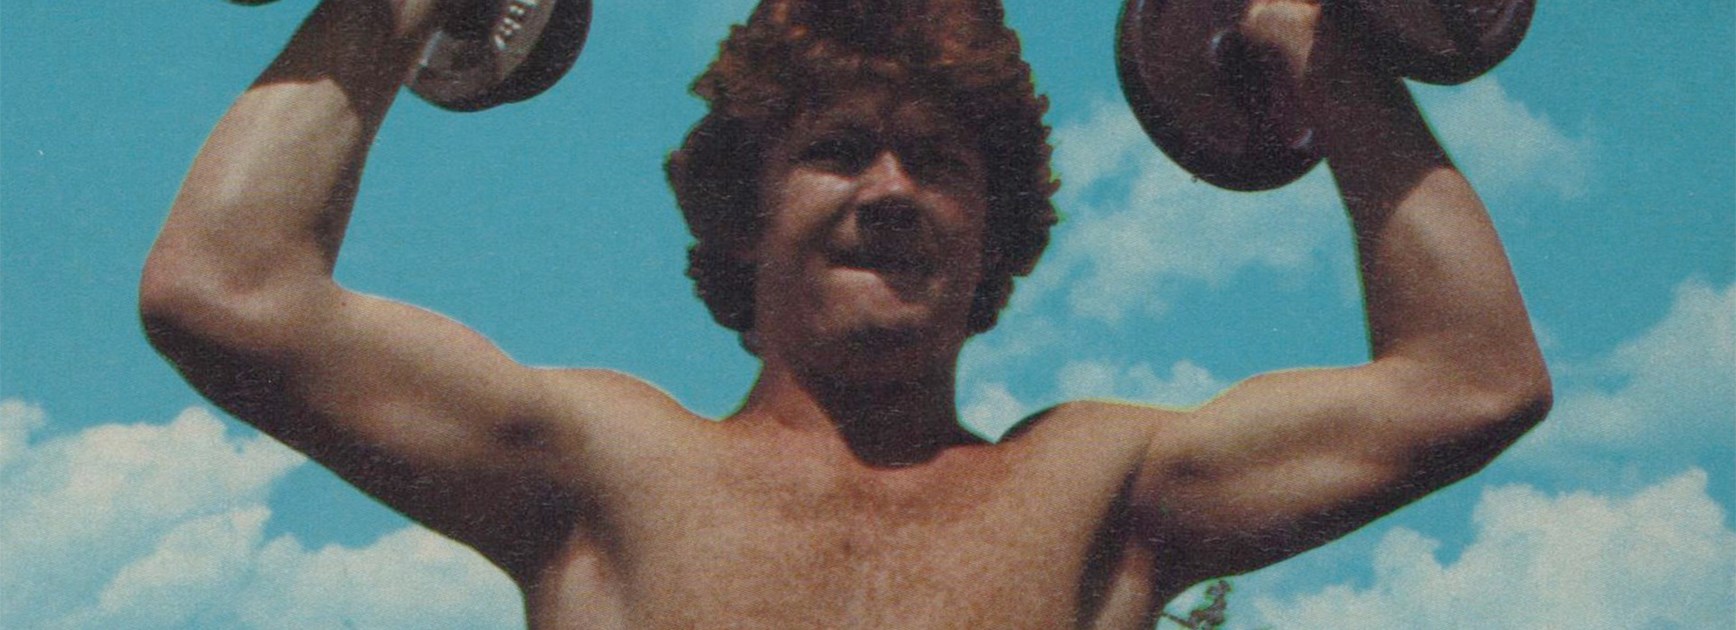 The humility that drove Paul Vautin on the path to greatness